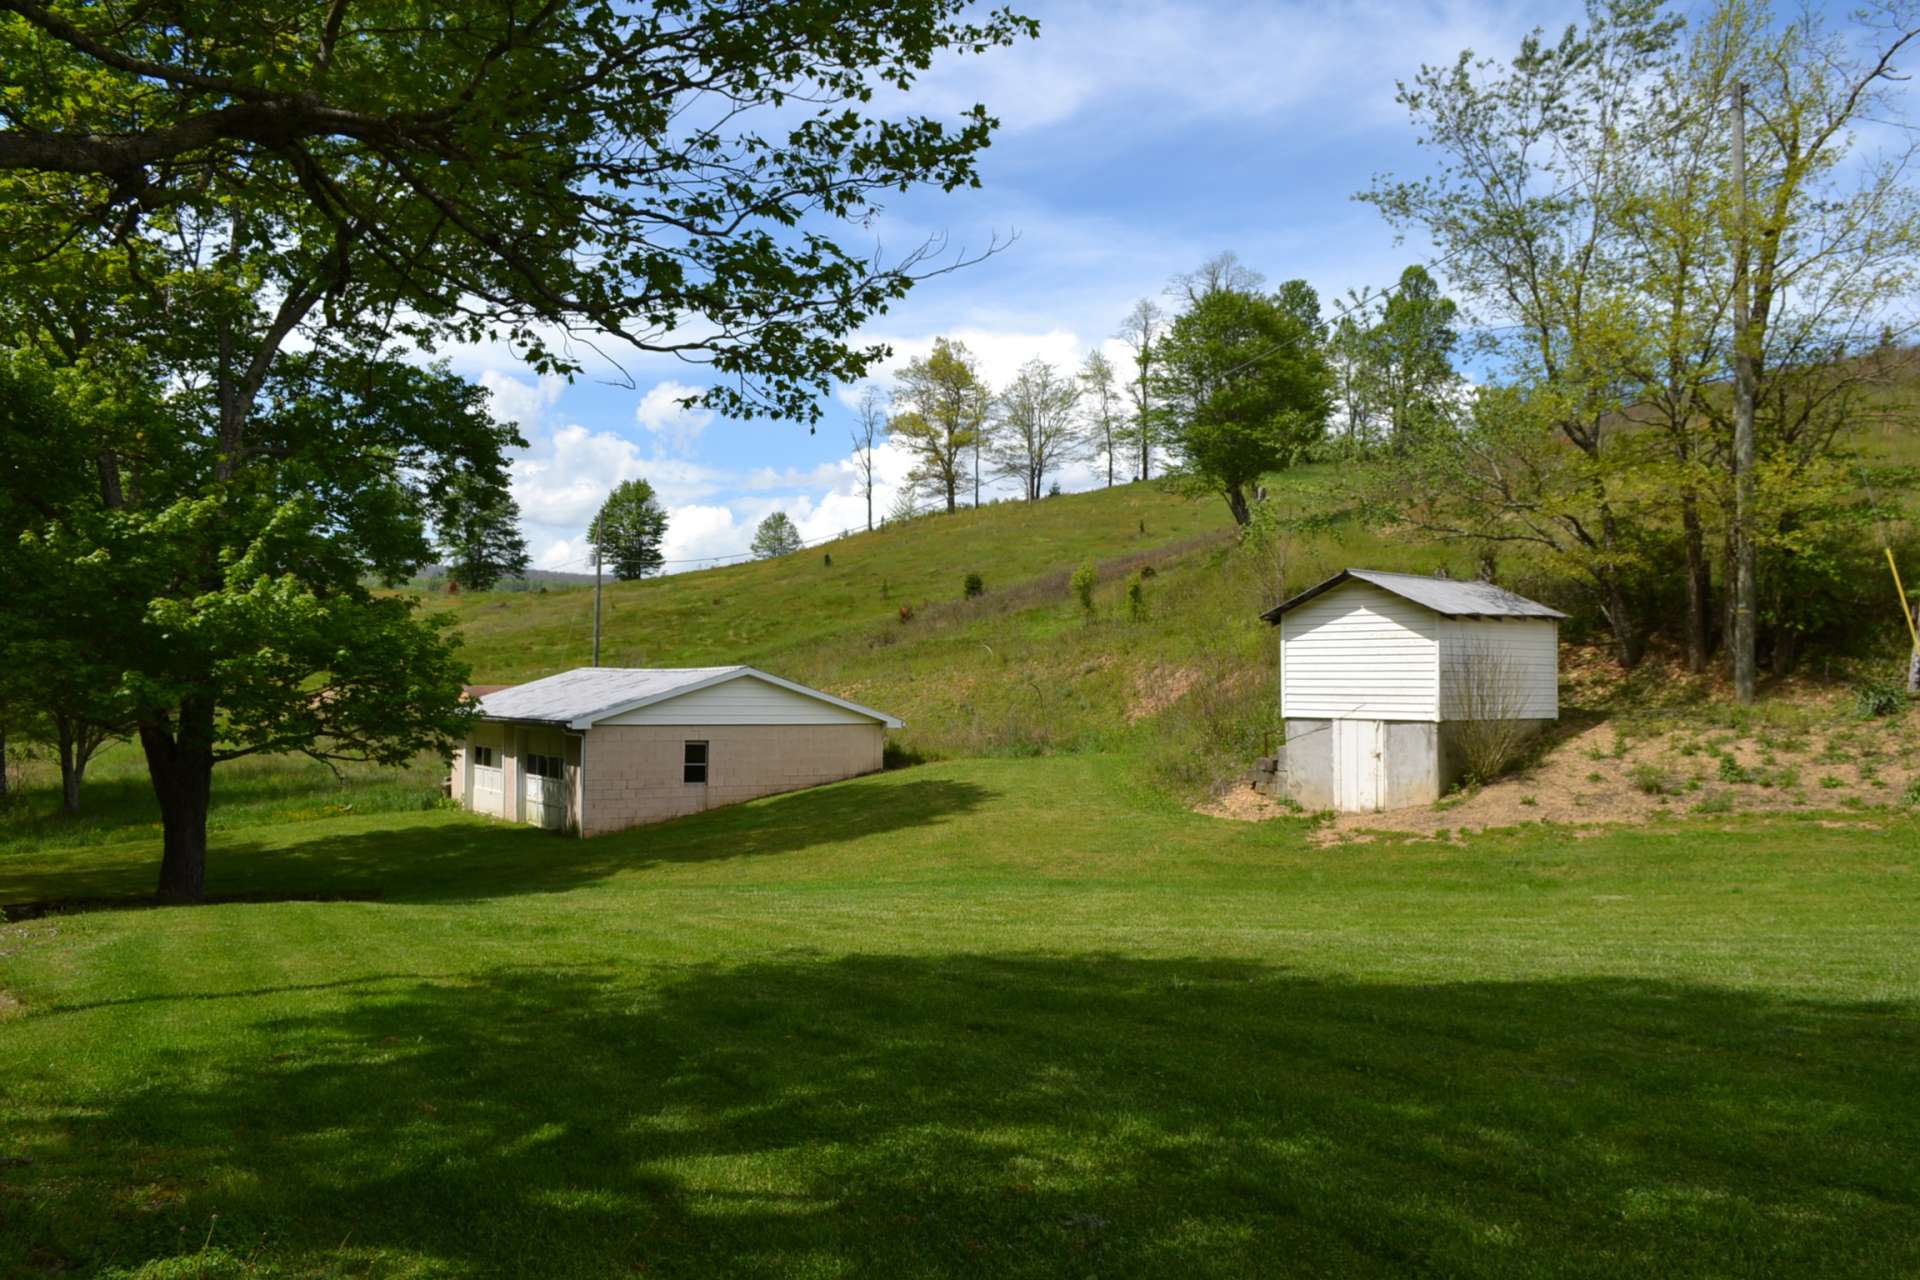 There is a 2 car detached garage/workshop, cellar, two septic systems and two wells on this property, perfect for potential extended family.